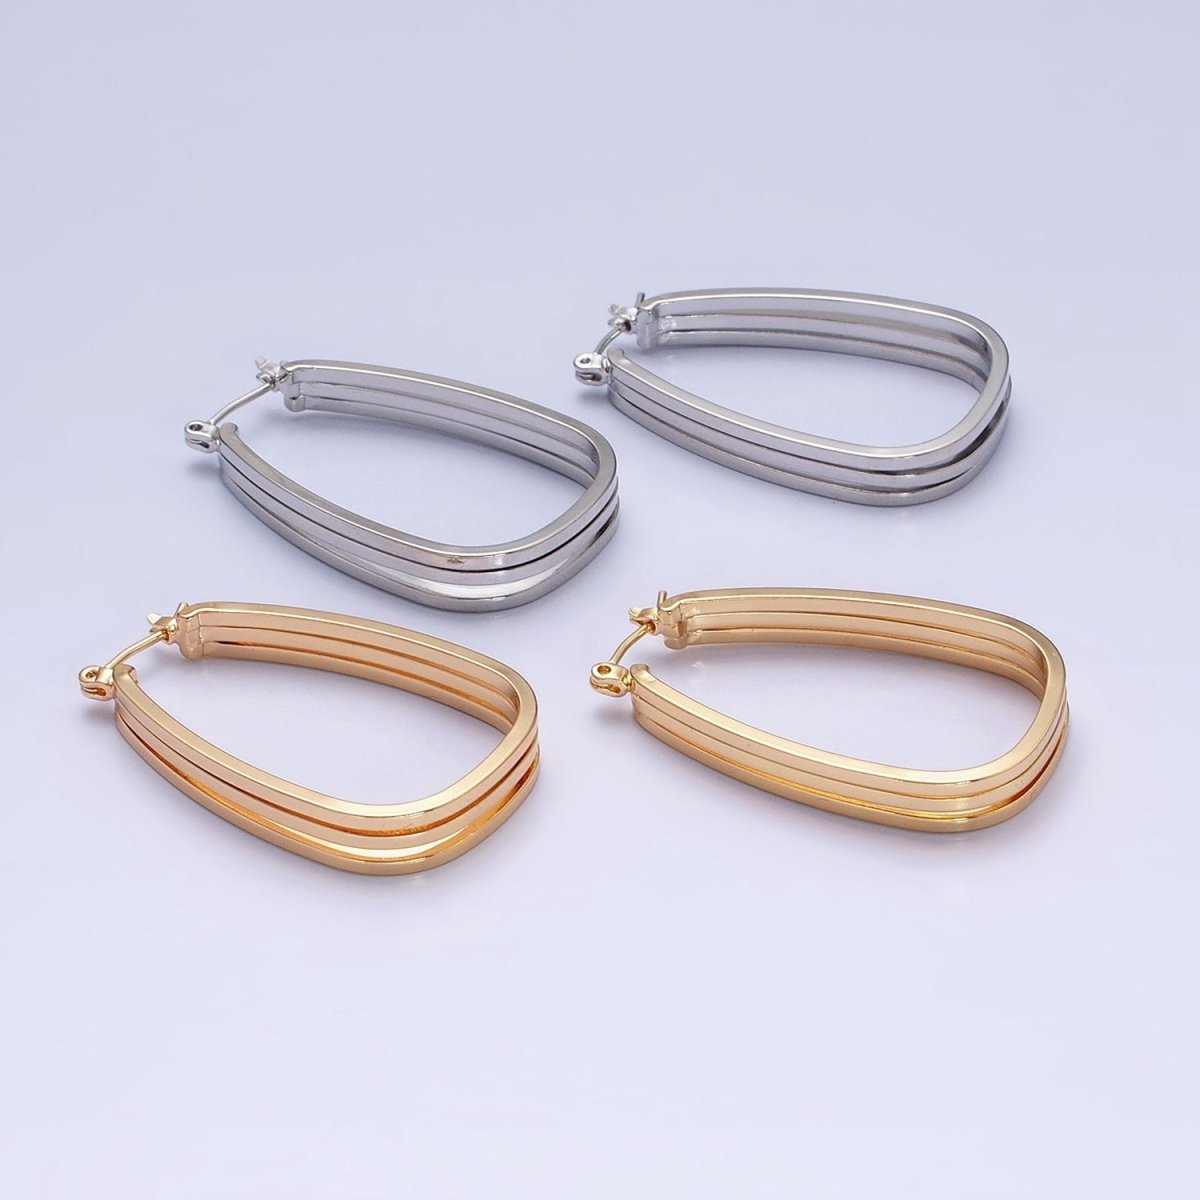 Statement Oval Hoop Earrings, Chunky Gold Hoop Earrings, Oval Gold Hoop Earrings, Modern Hoop Earrings AD1004 AD1005 - DLUXCA